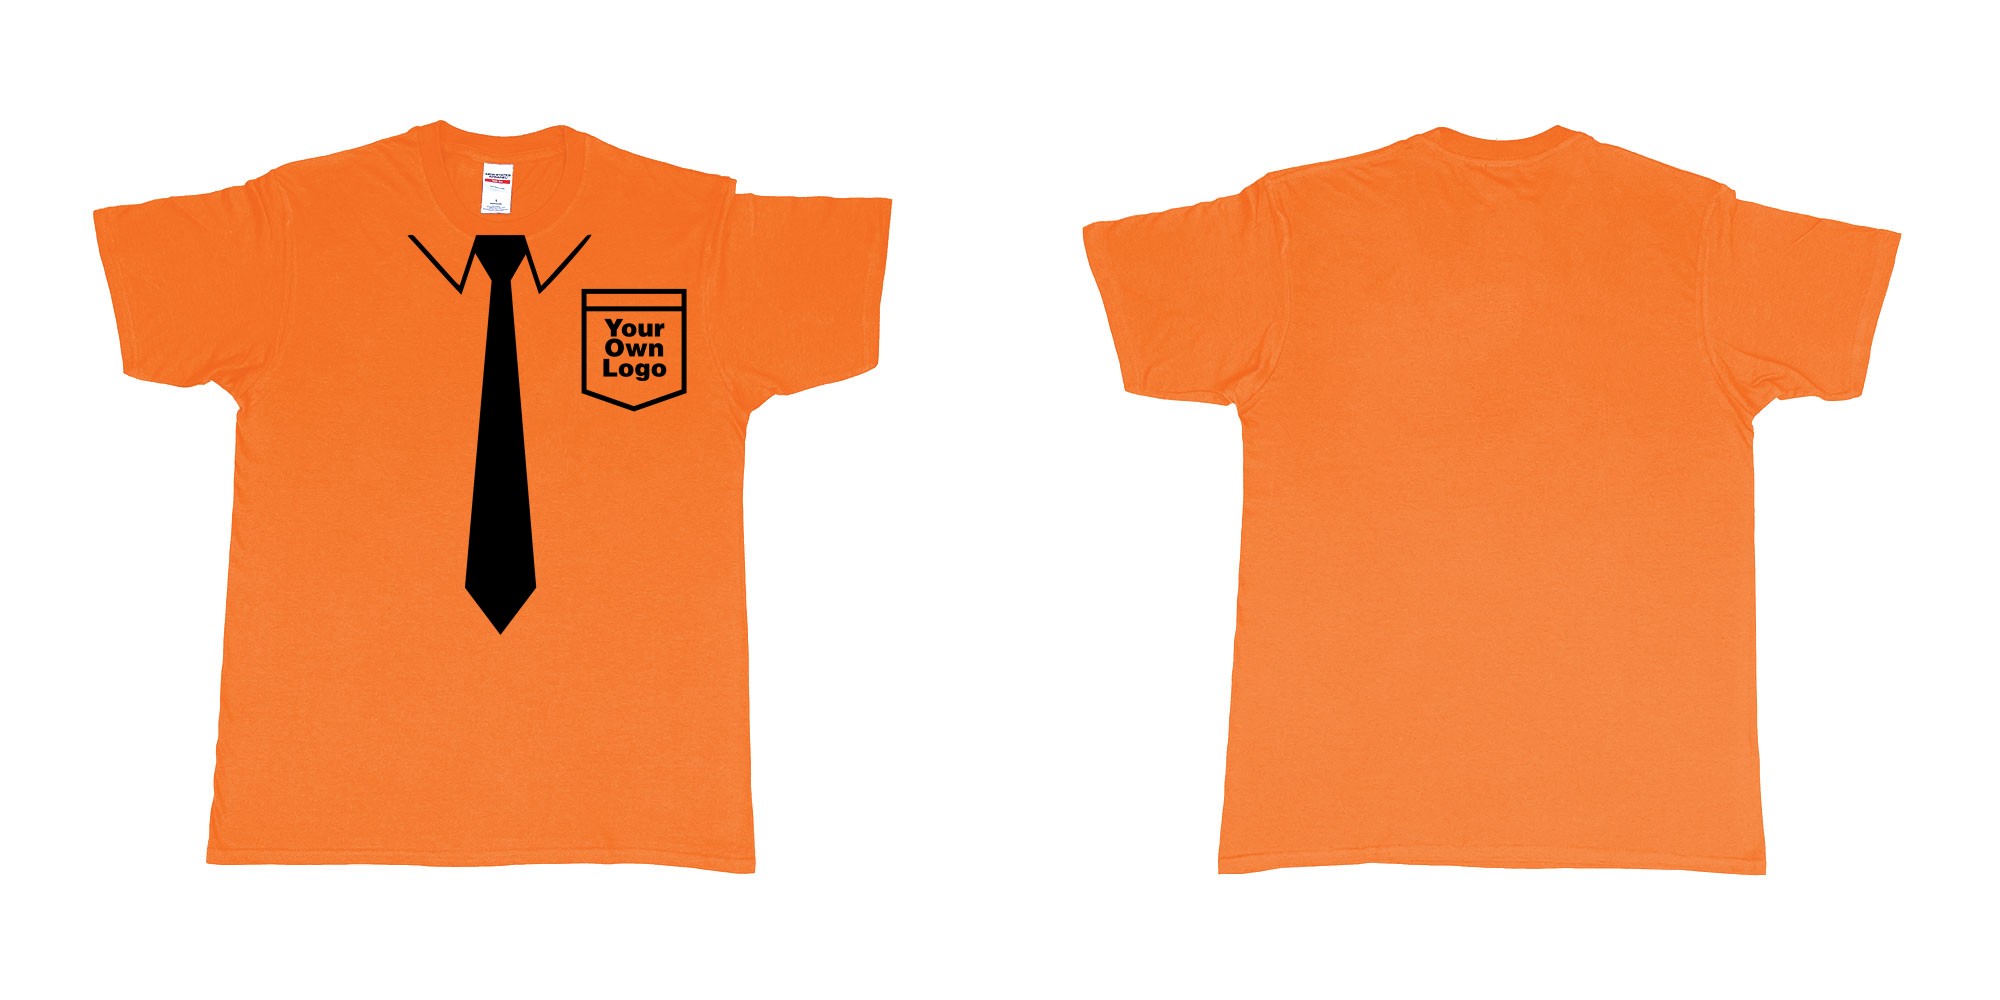 Custom tshirt design staff uniform with tie pocket own logo bali in fabric color orange choice your own text made in Bali by The Pirate Way